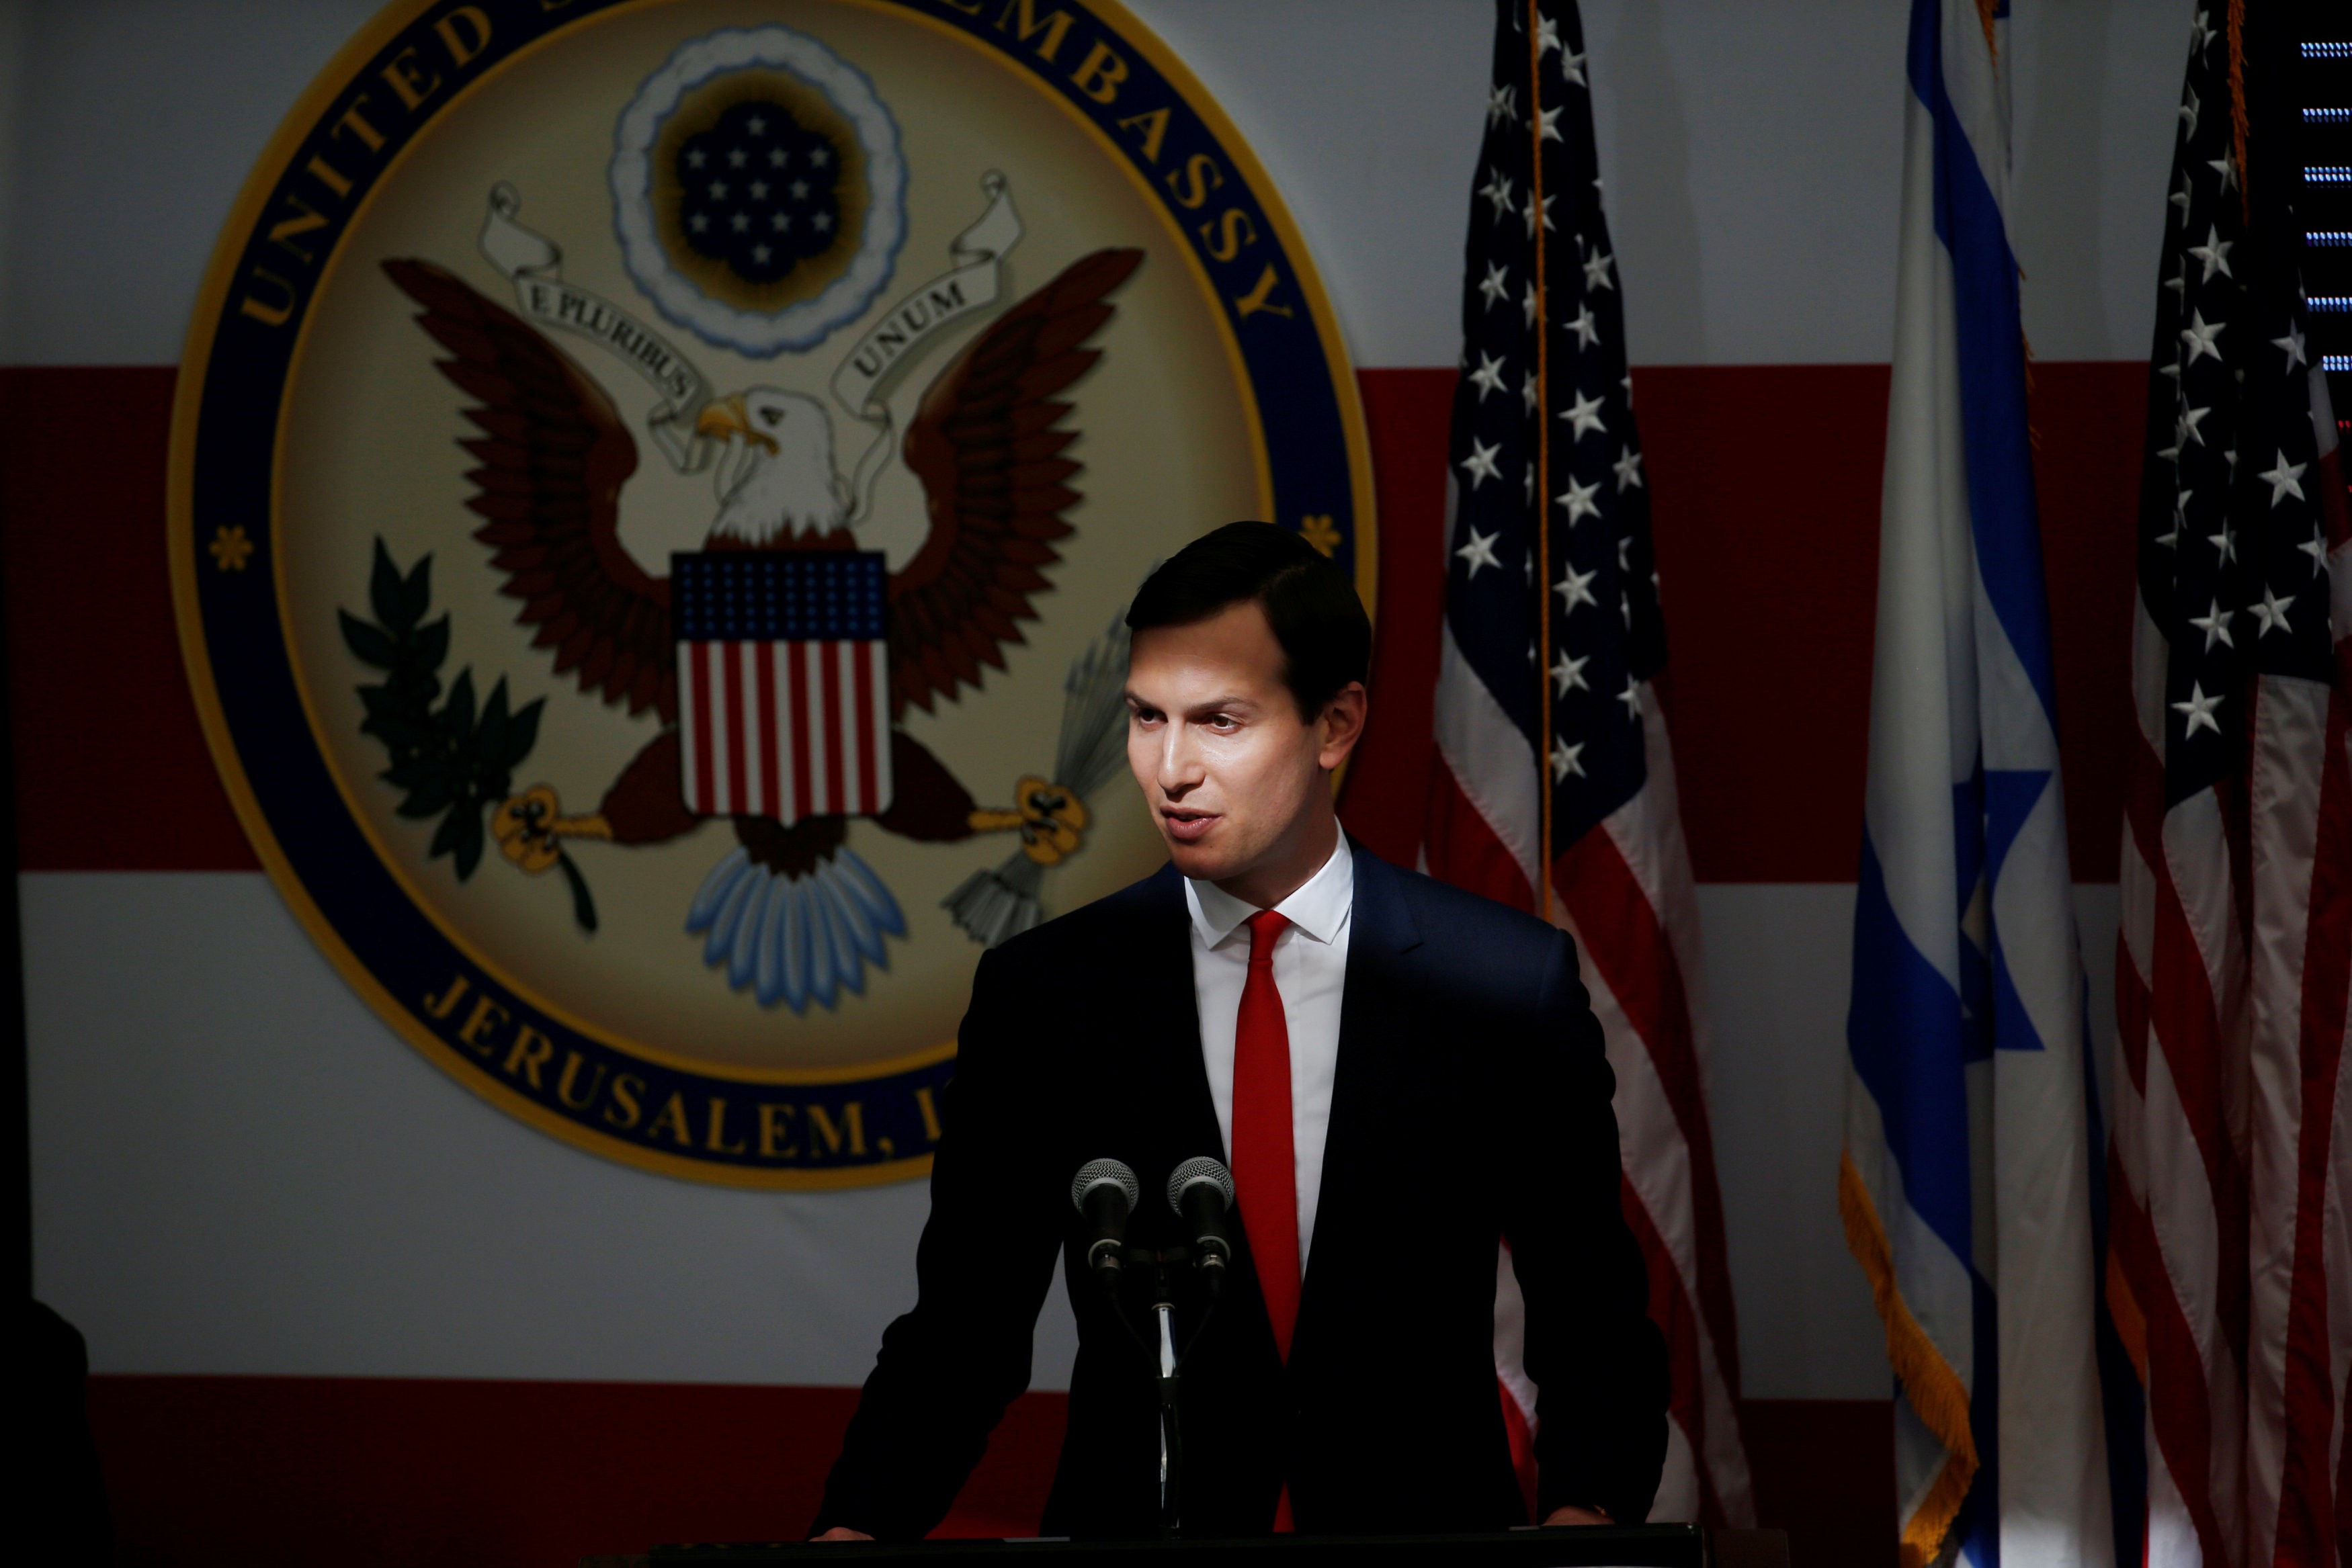 White House Senior Adviser Jared Kushner speaking during the dedication ceremony of the new US embassy in Jerusalem on Monday, in his capacity as US President Trump’s Middle East point man. Kushner’s family is reportedly getting a business that is linked to the Qatari government to bail it out of a difficult real estate deal. Photo: Reuters